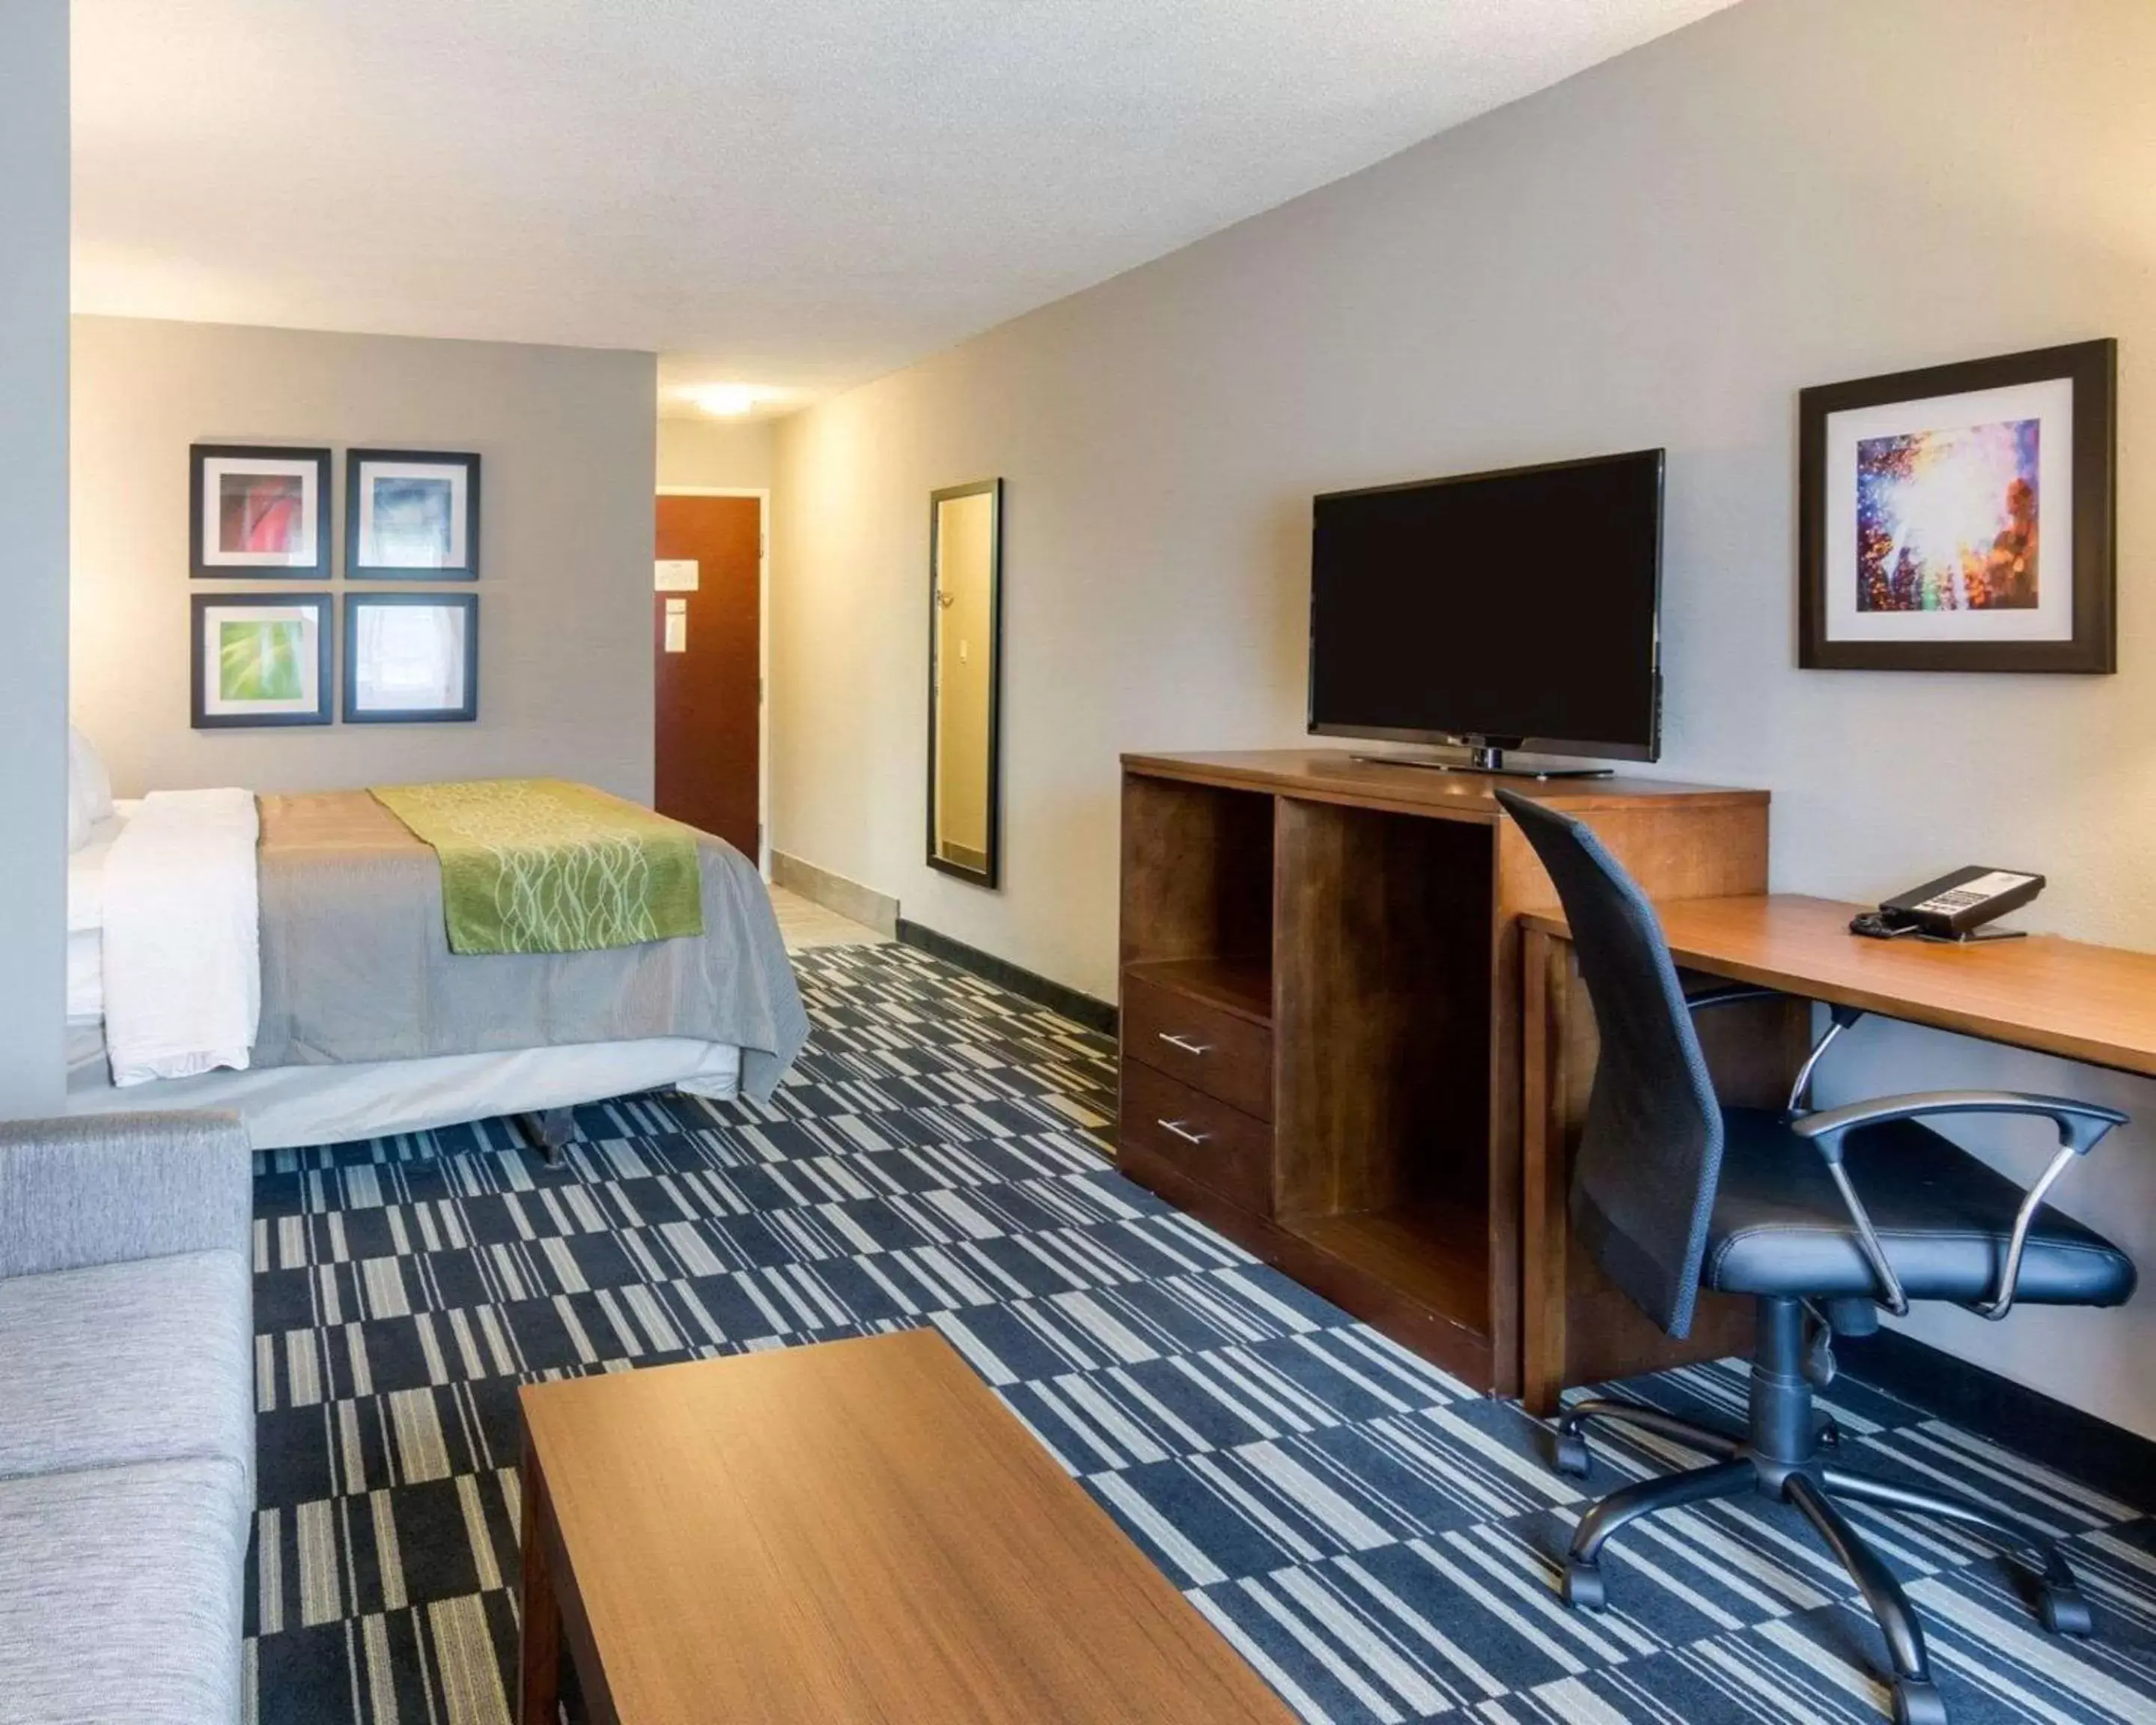 King Suite with Sofa Bed - Non-Smoking in Quality Inn & Suites Ashland near Kings Dominion